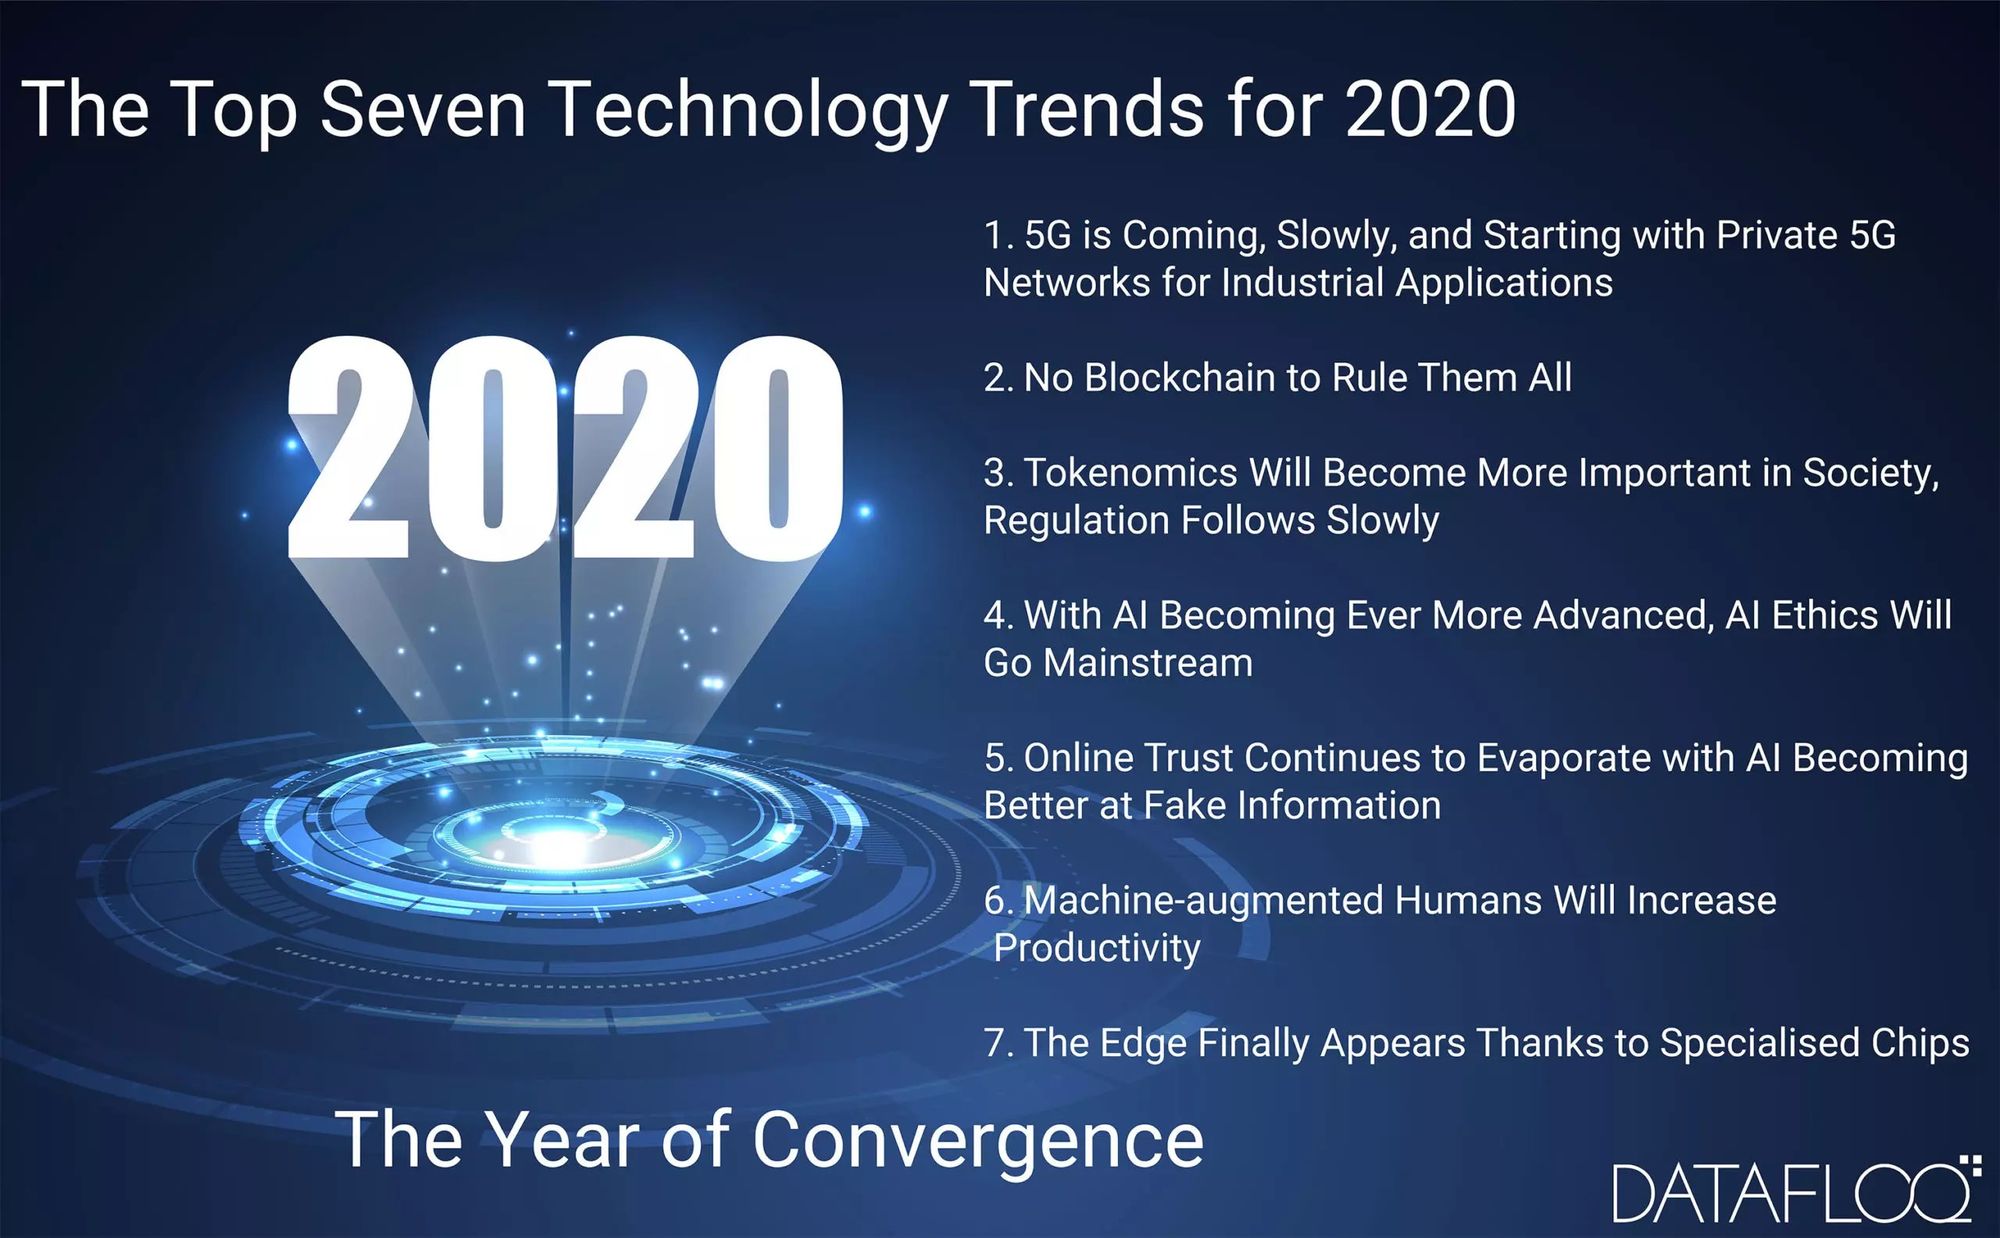 The Top Seven Technology Trends for 2020